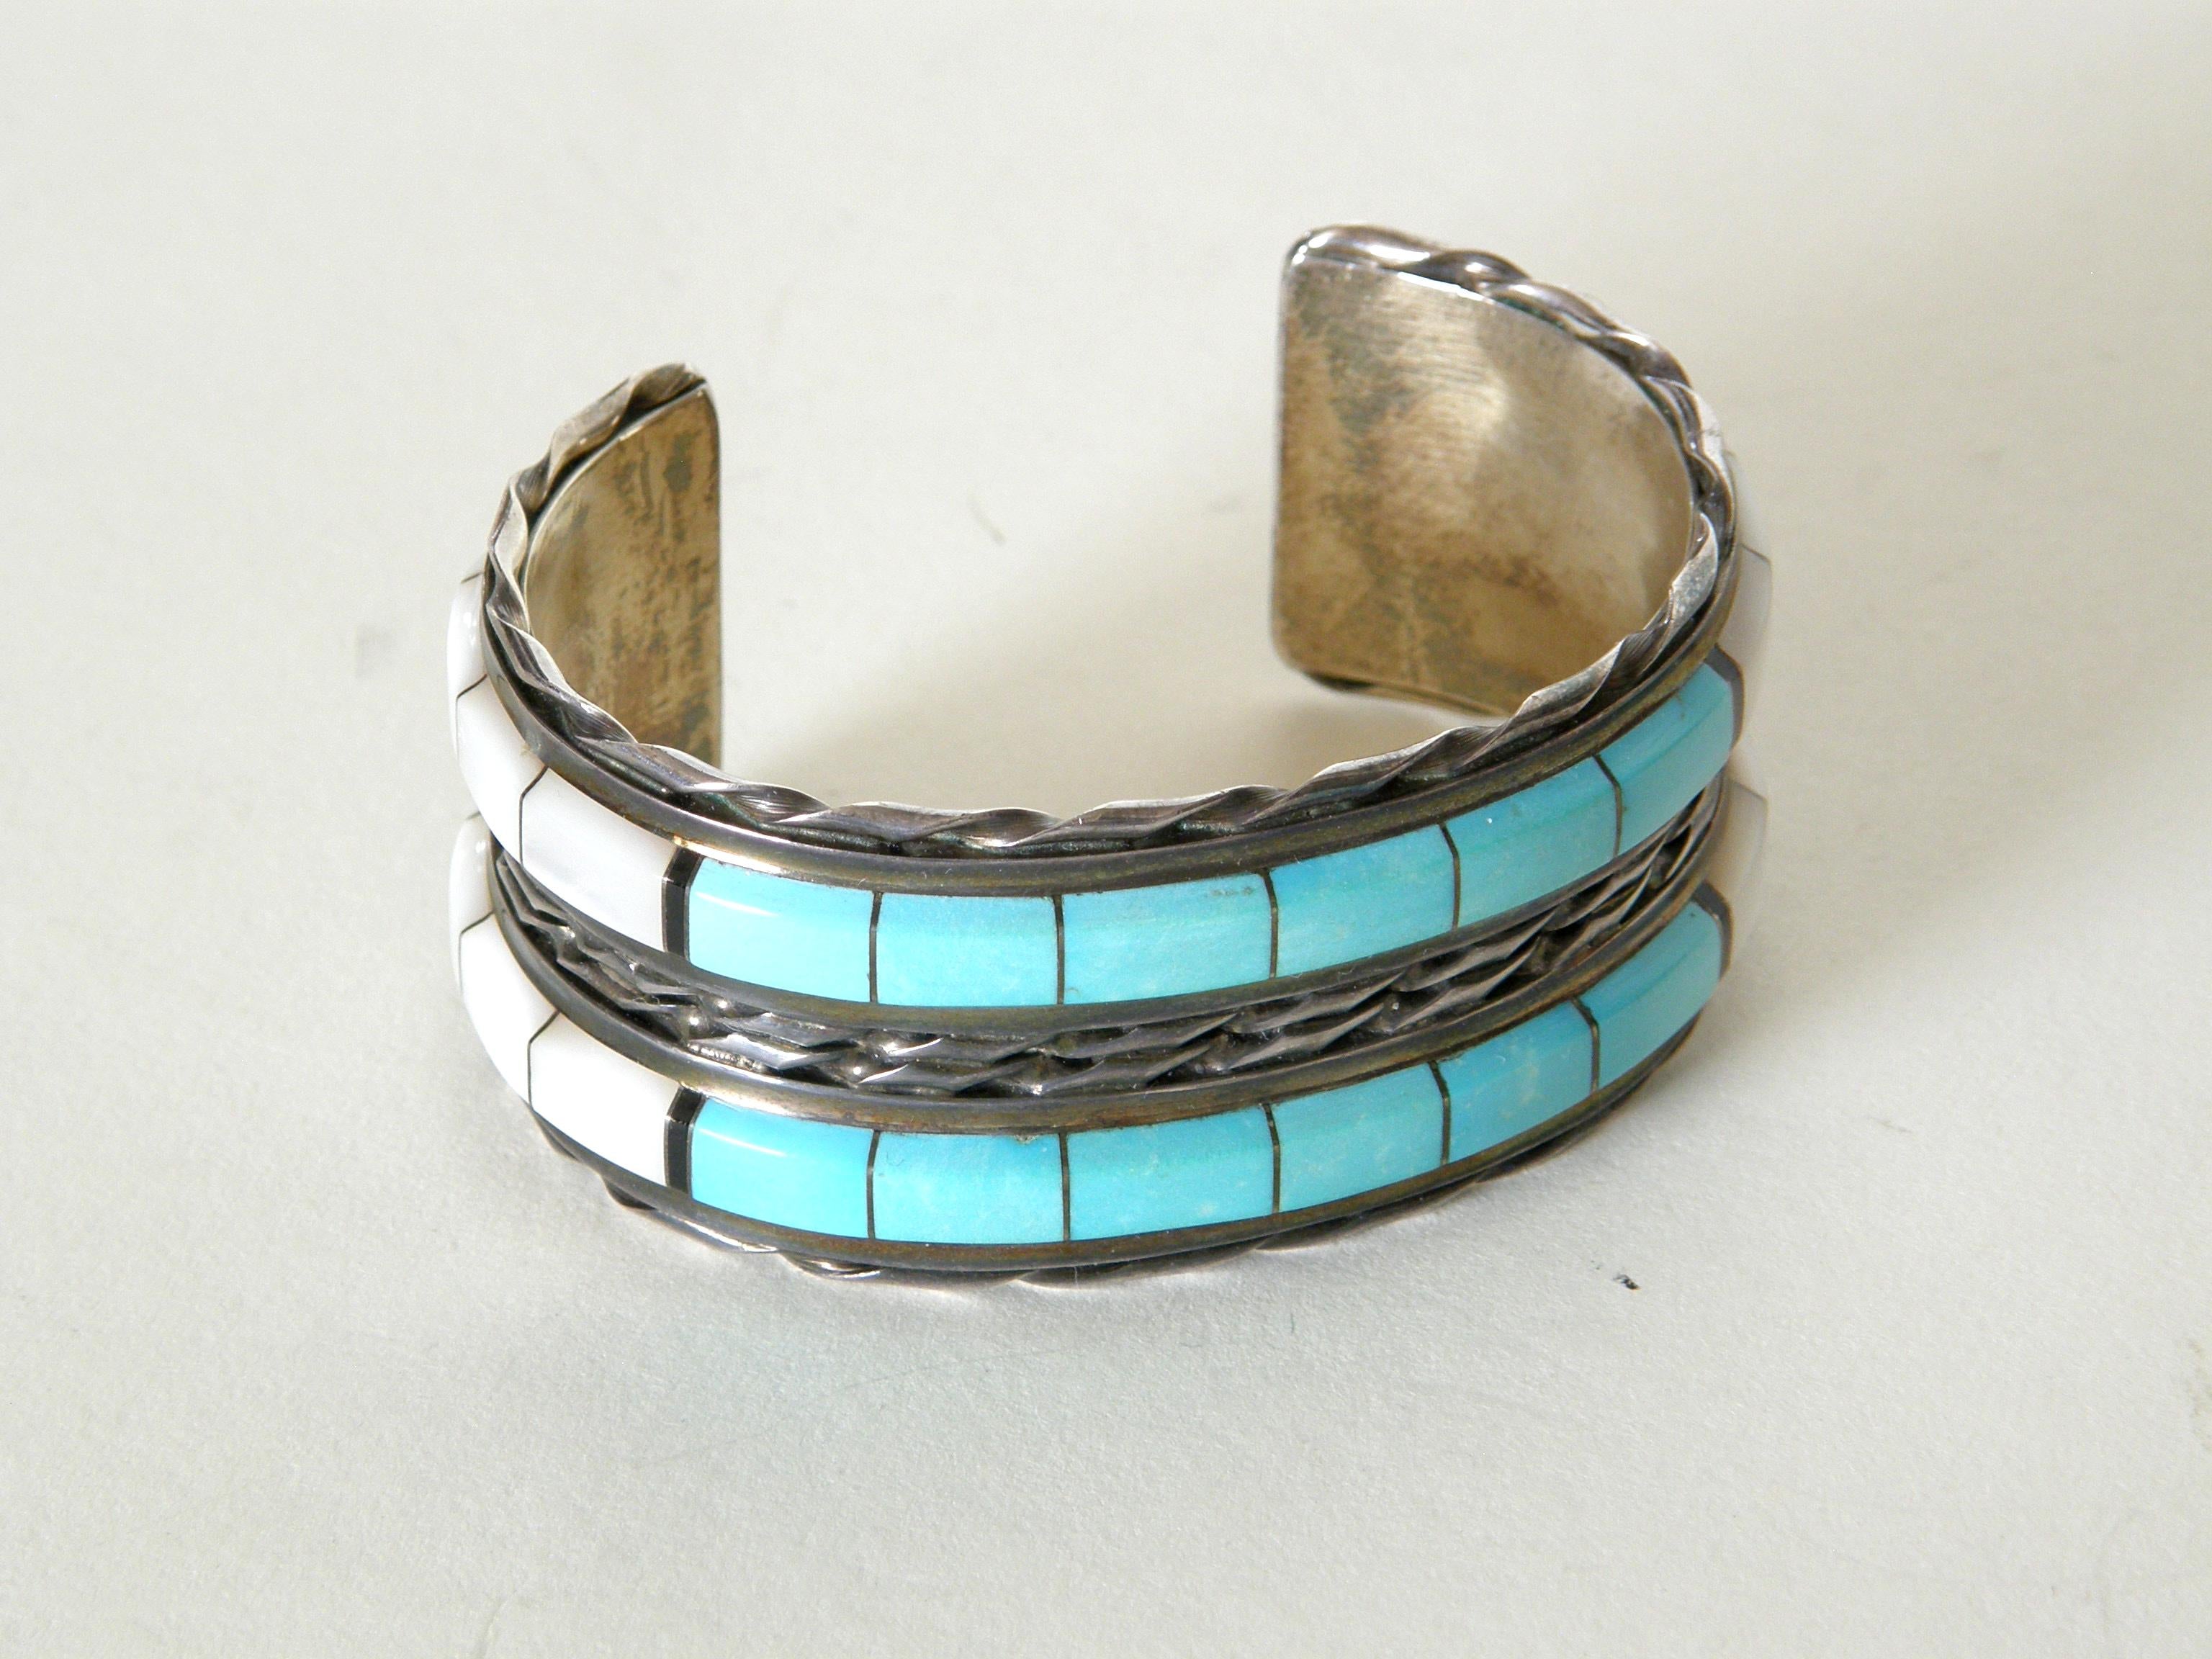 This handsome sterling silver cuff bracelet was made by Zuni artists Martin and Esther Panteah. The banded design features rows of turquoise and mother of pearl in a raised inlay. They are framed by rows of twisted bands of silver.

marked : “M T